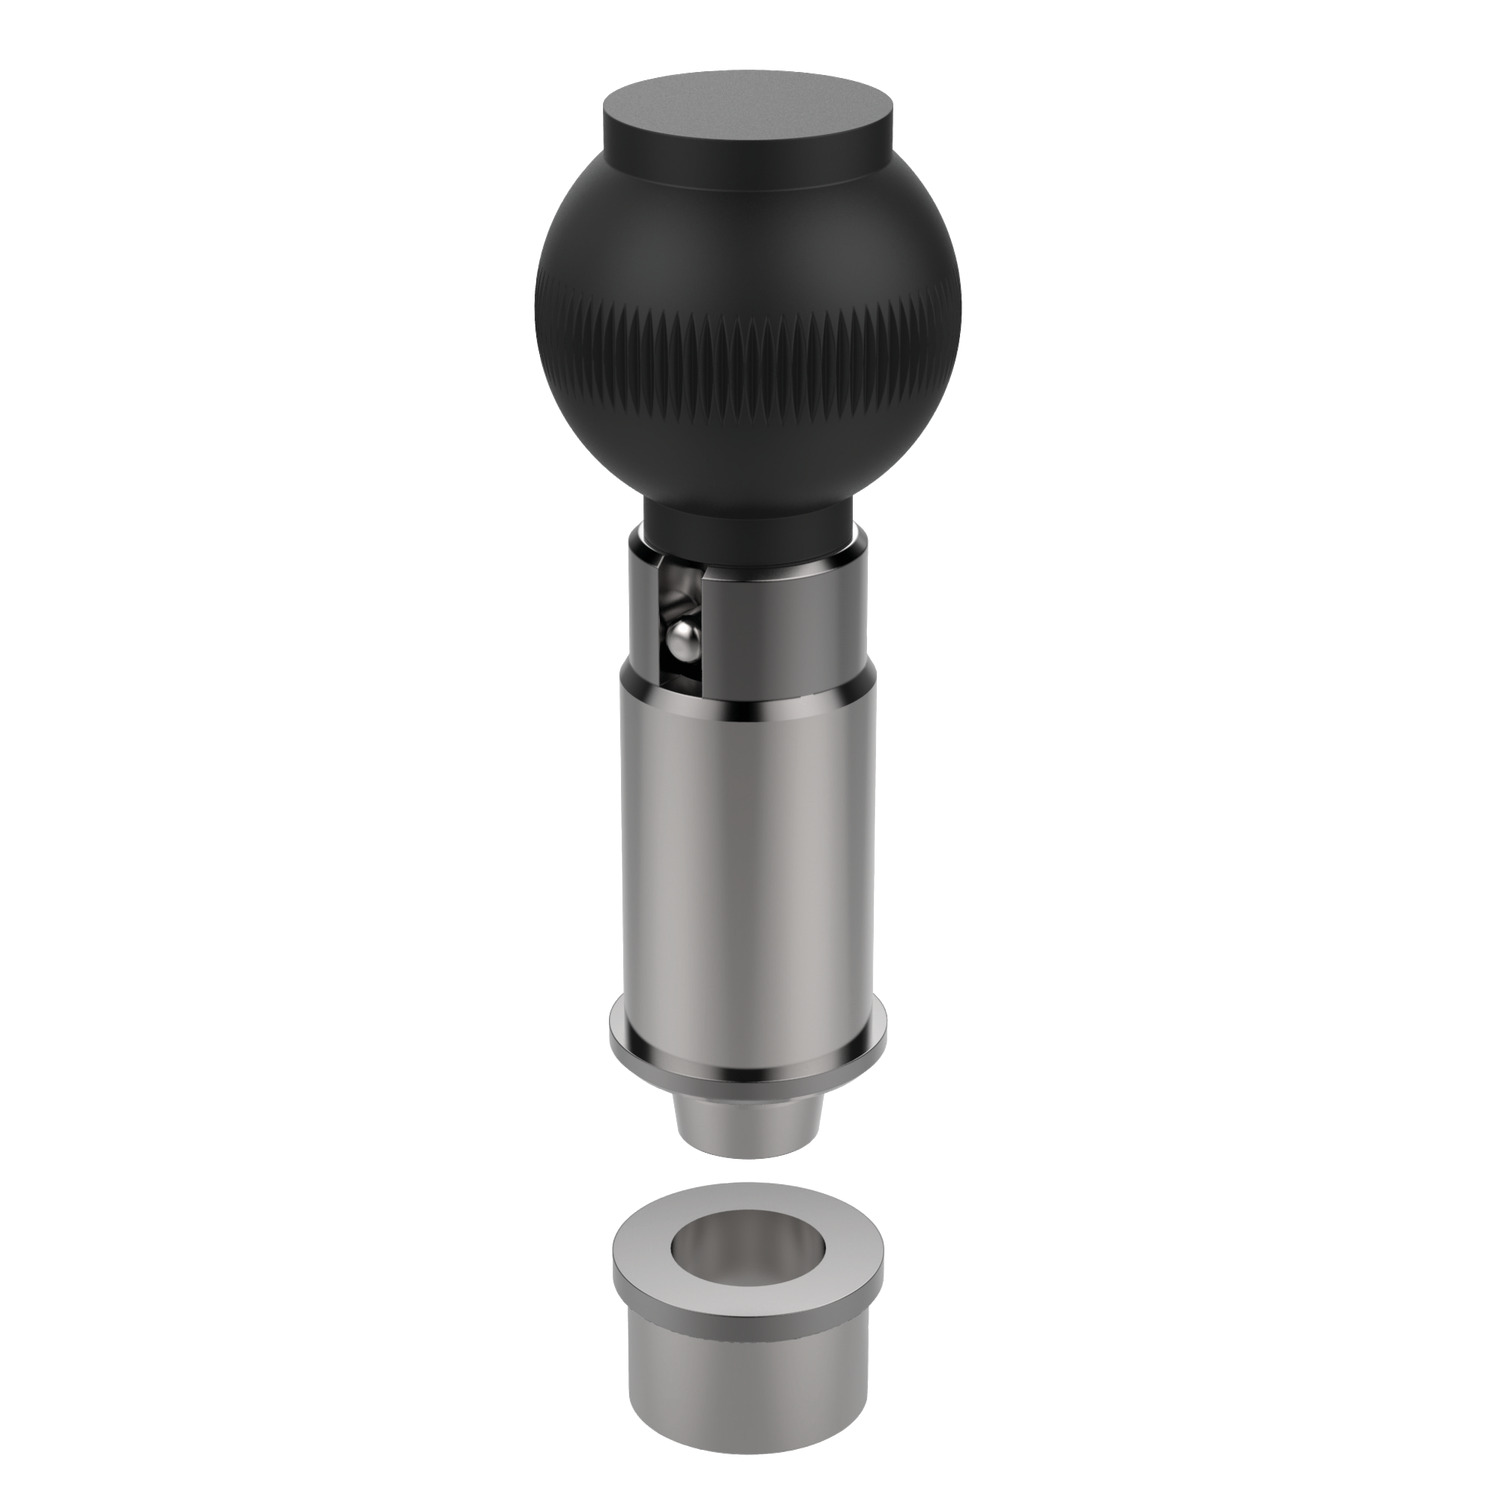 Index Plungers - Precision Precision index plungers with tapered pin. Made from case hardened steel with thermoplastic grip. Available in locking or non-locking types.